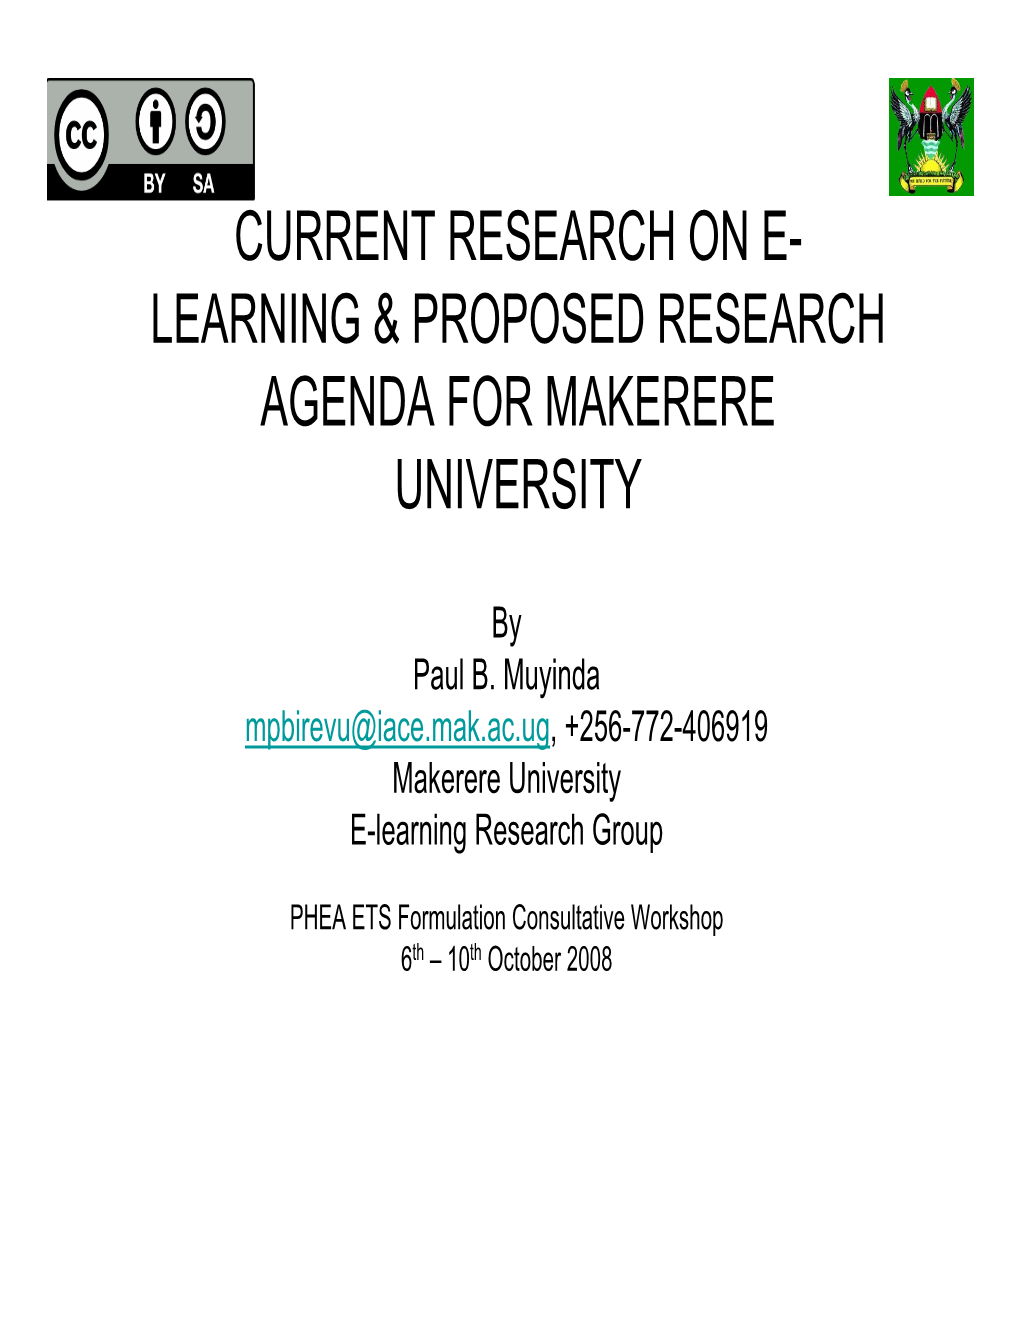 Learning & Proposed Research Agenda for Makerere University